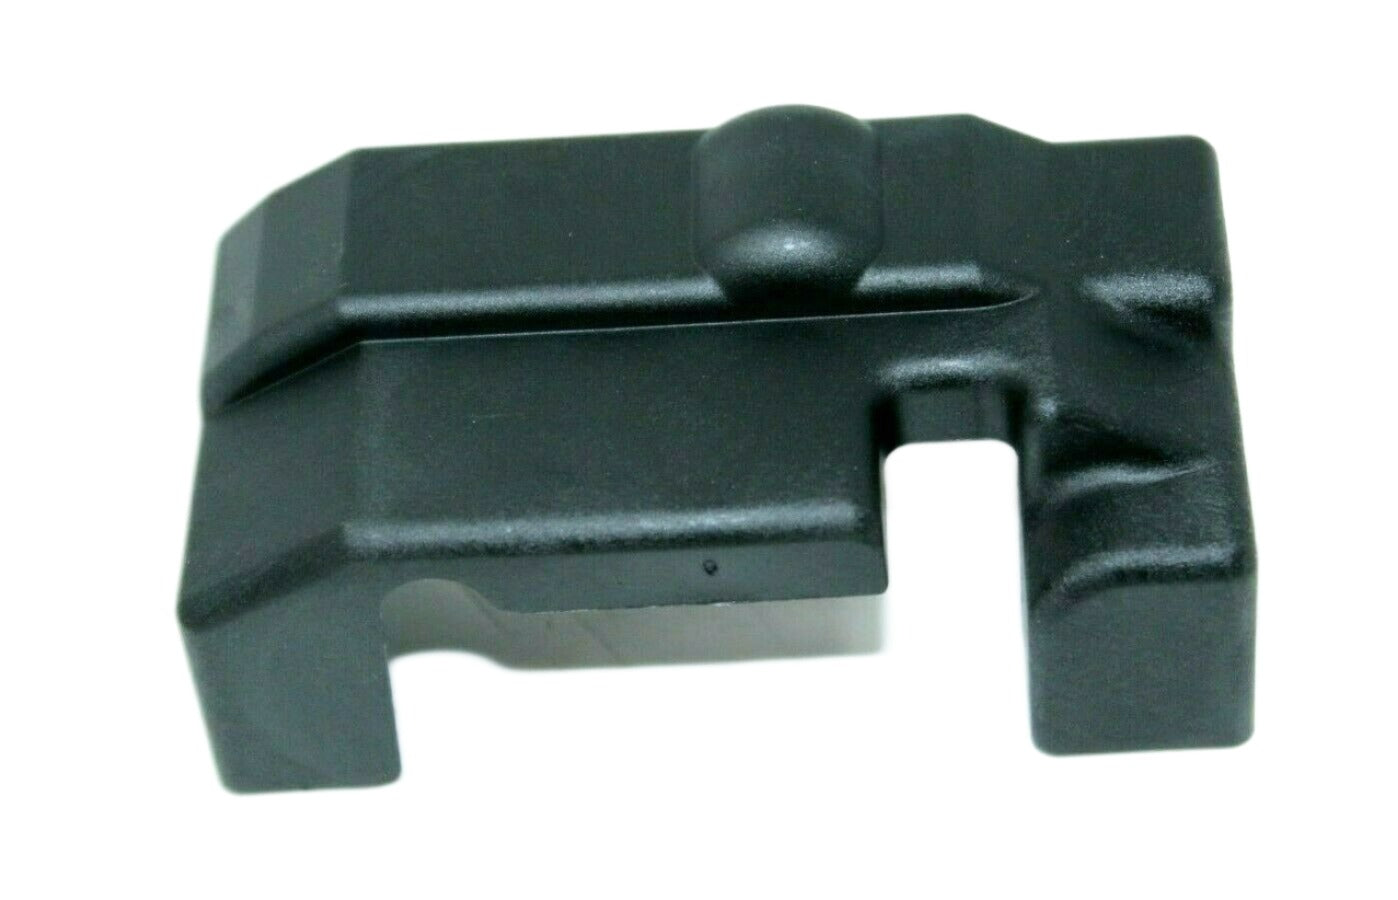 Webasto Harness Cover For Thermotop Tsl17 Thermo50 1311100A Heater Part